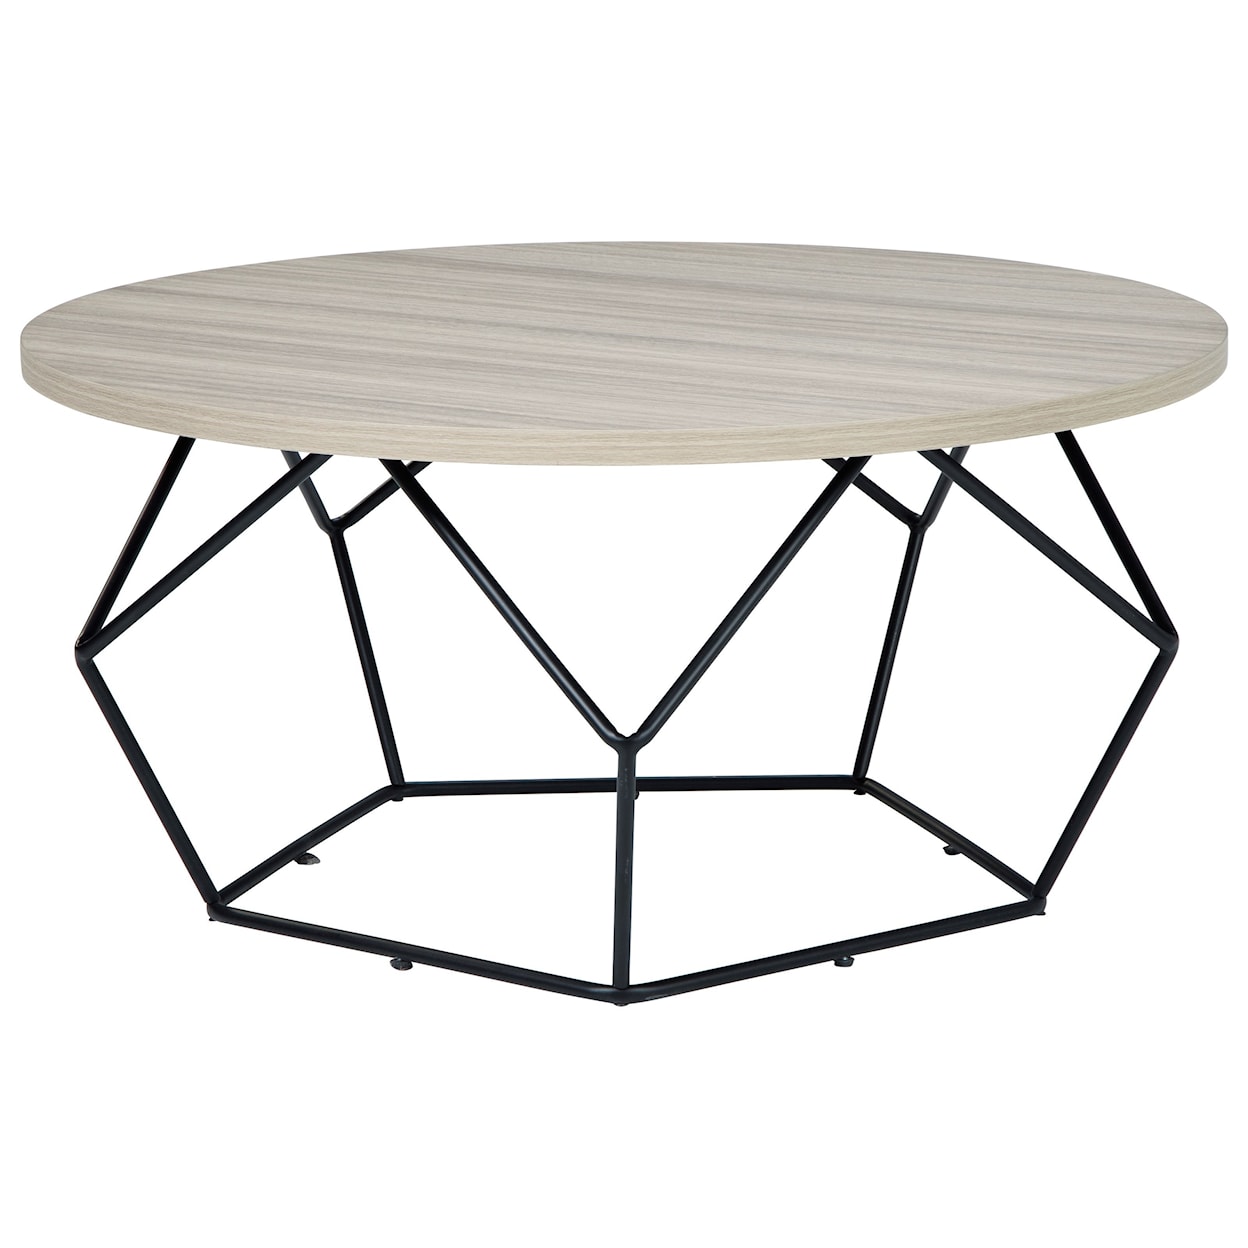 Signature Design by Ashley Waylowe Round Cocktail Table